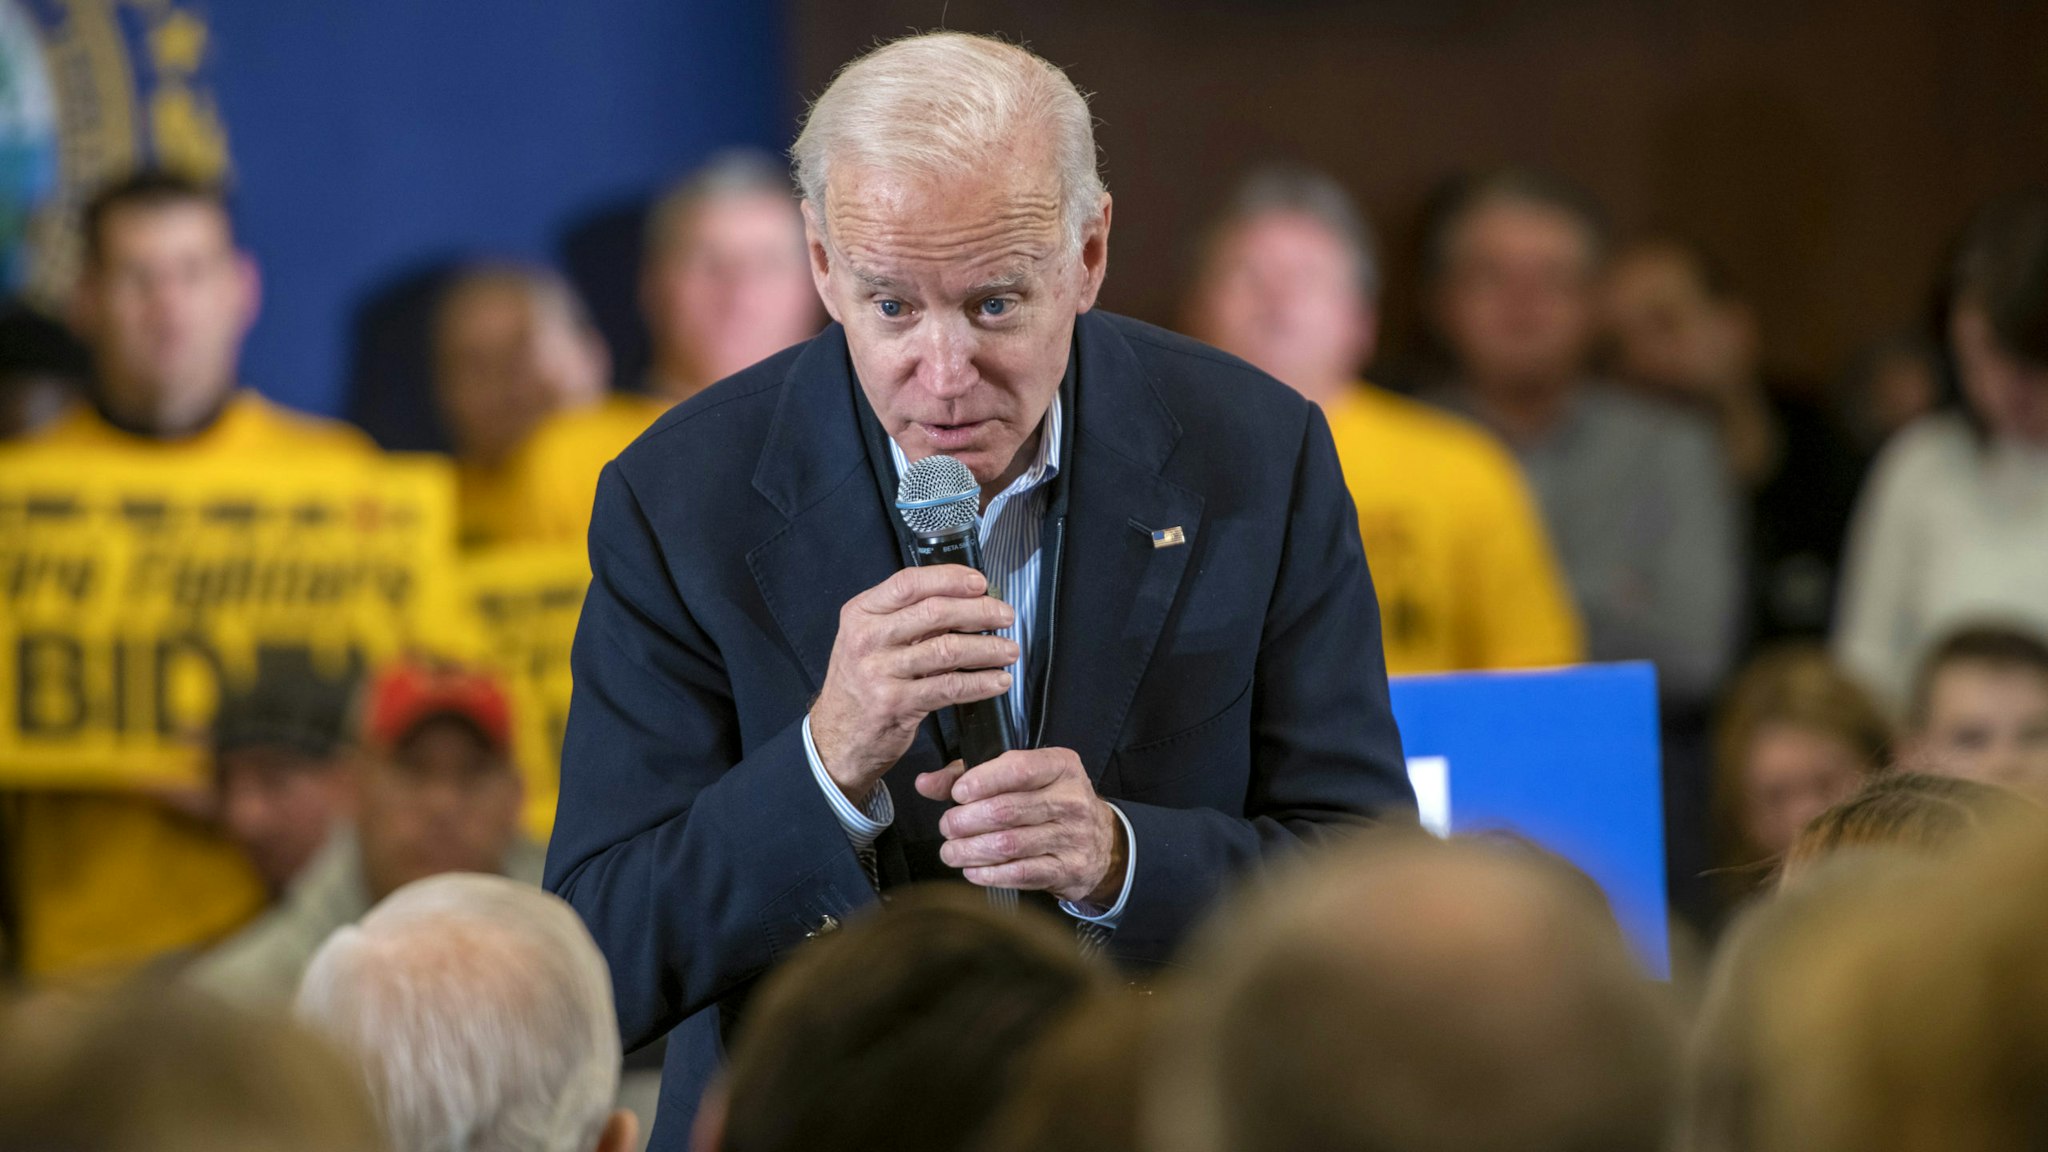 Former Vice President Joe Biden, 2020 Democratic presidential candidate, takes a question from an attendee during a GOTV Event in Hampton, New Hampshire, U.S., on Sunday, Feb. 9, 2020. Biden, flagging in the polls, returned to more comfortable territory on the trail by offering subtle contrasts with his Democratic opponents and vowing to stay in the race even if he doesn't have a good showing in the New Hampshire primary.